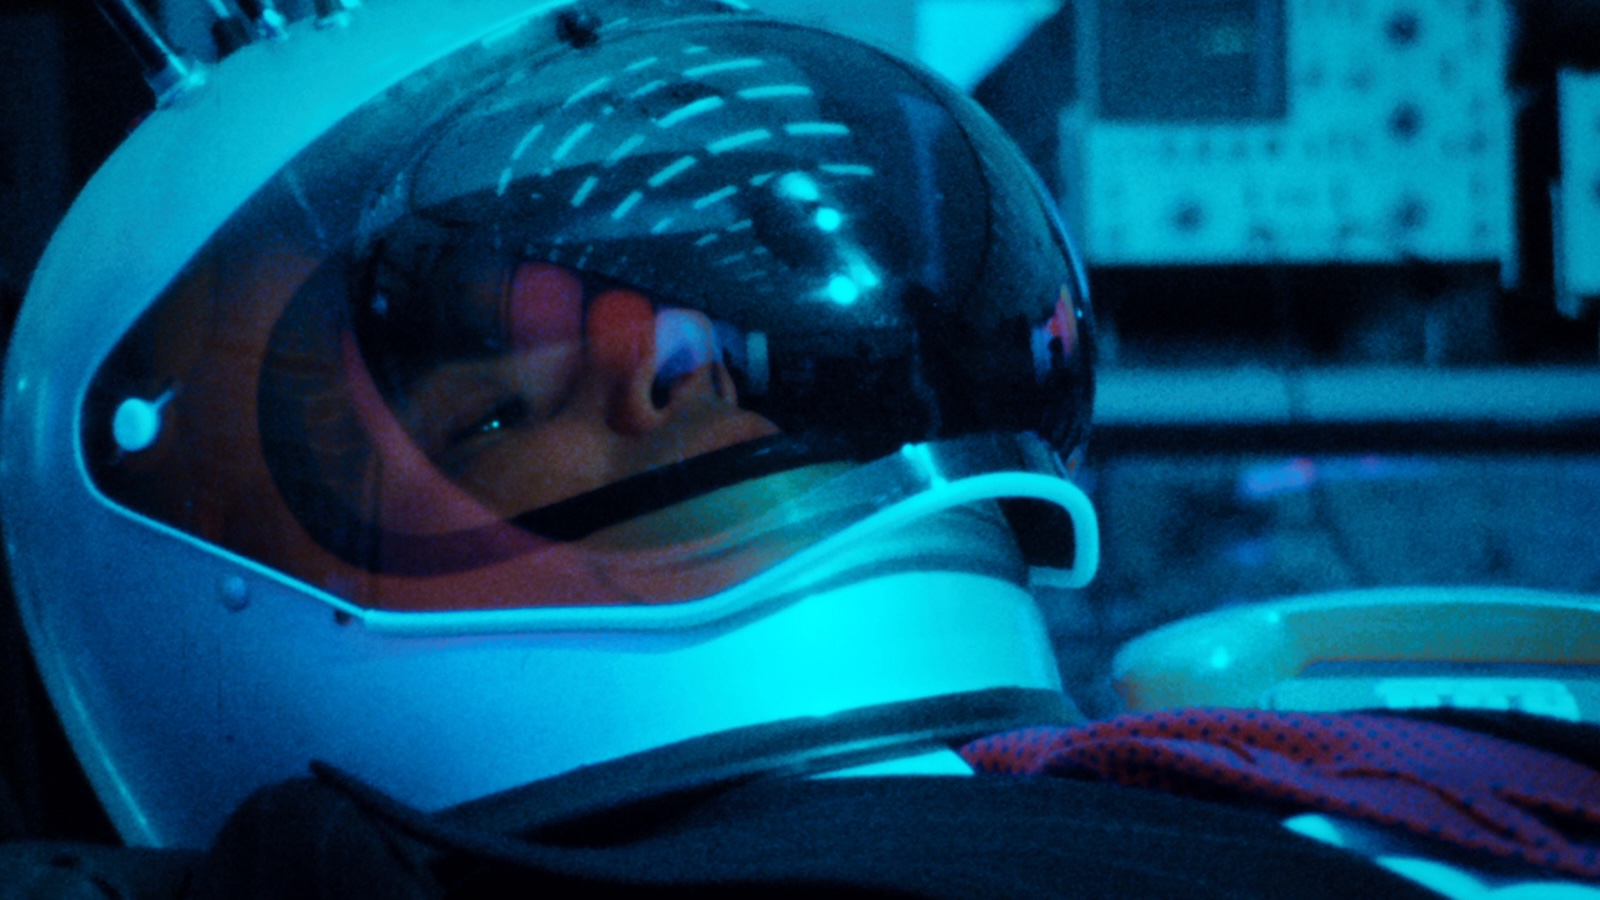 A man in a space helmet reclines, with reflections of lights on the glass viser